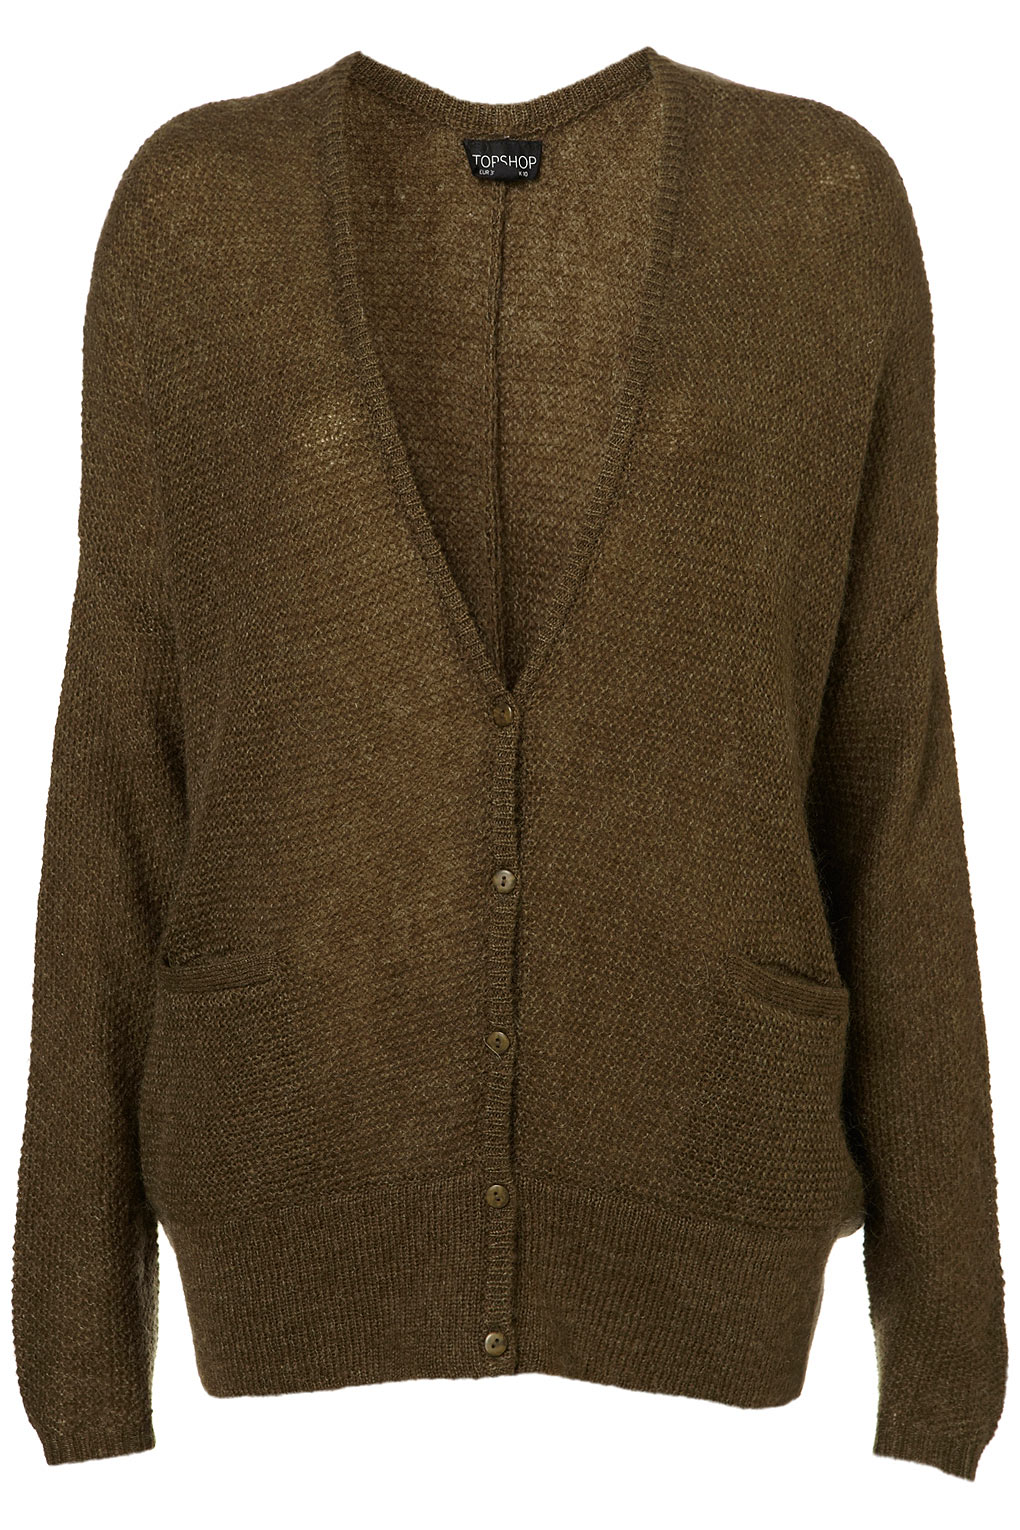 Lyst - Topshop Knitted Mohair Boxy Cardigan in Green